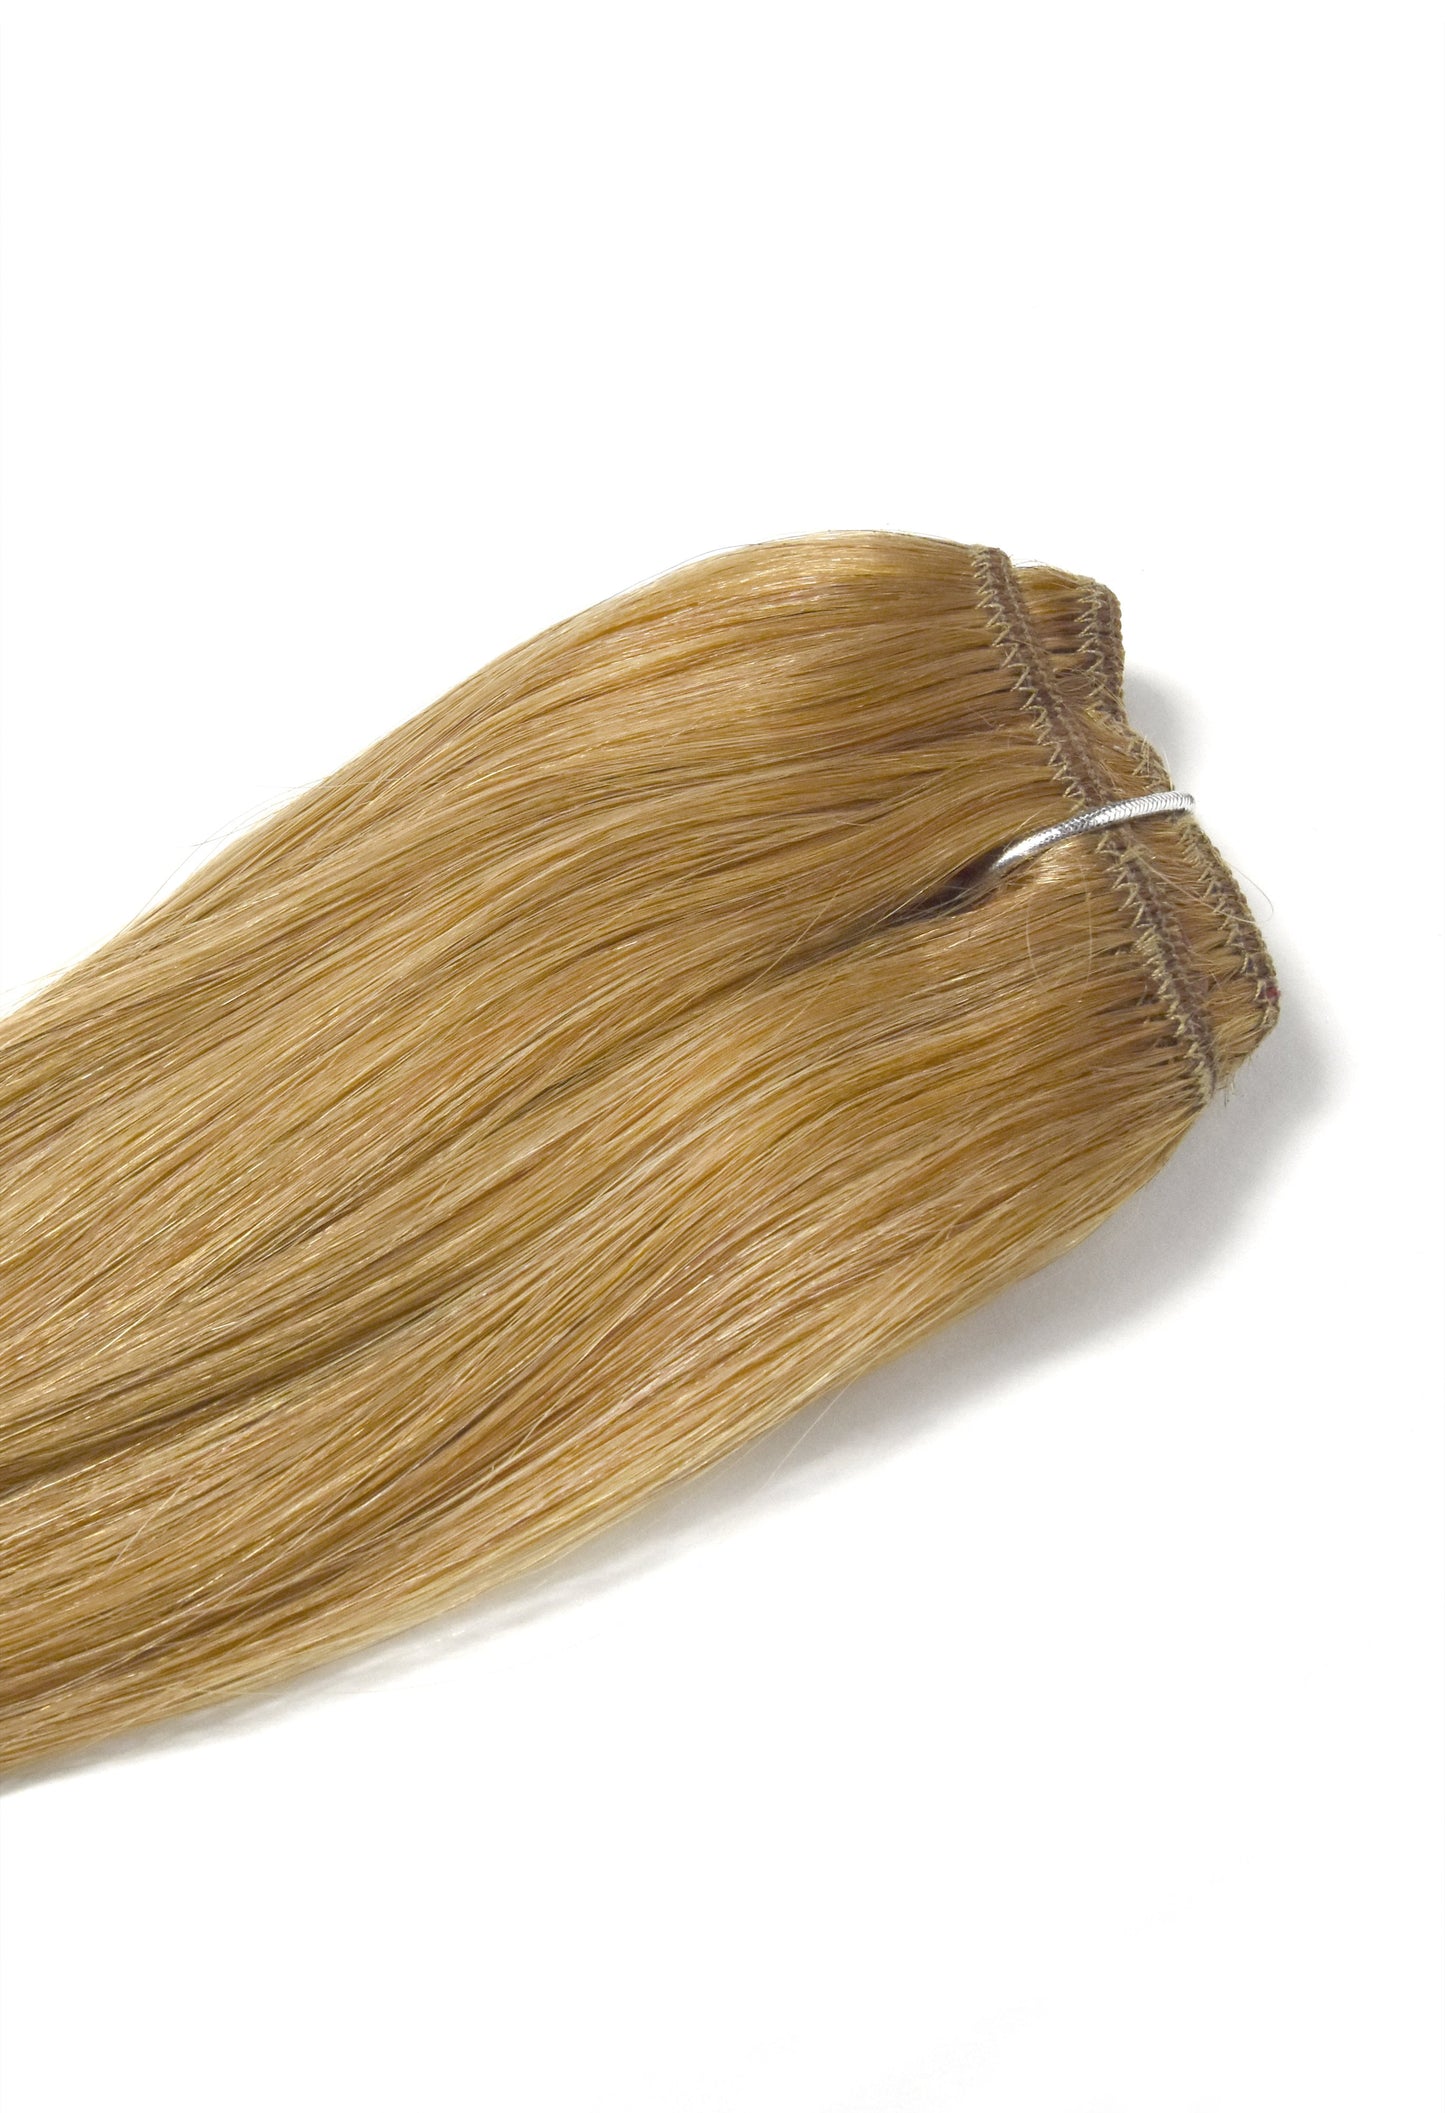 hair pieces clip in human hair extensions one piece